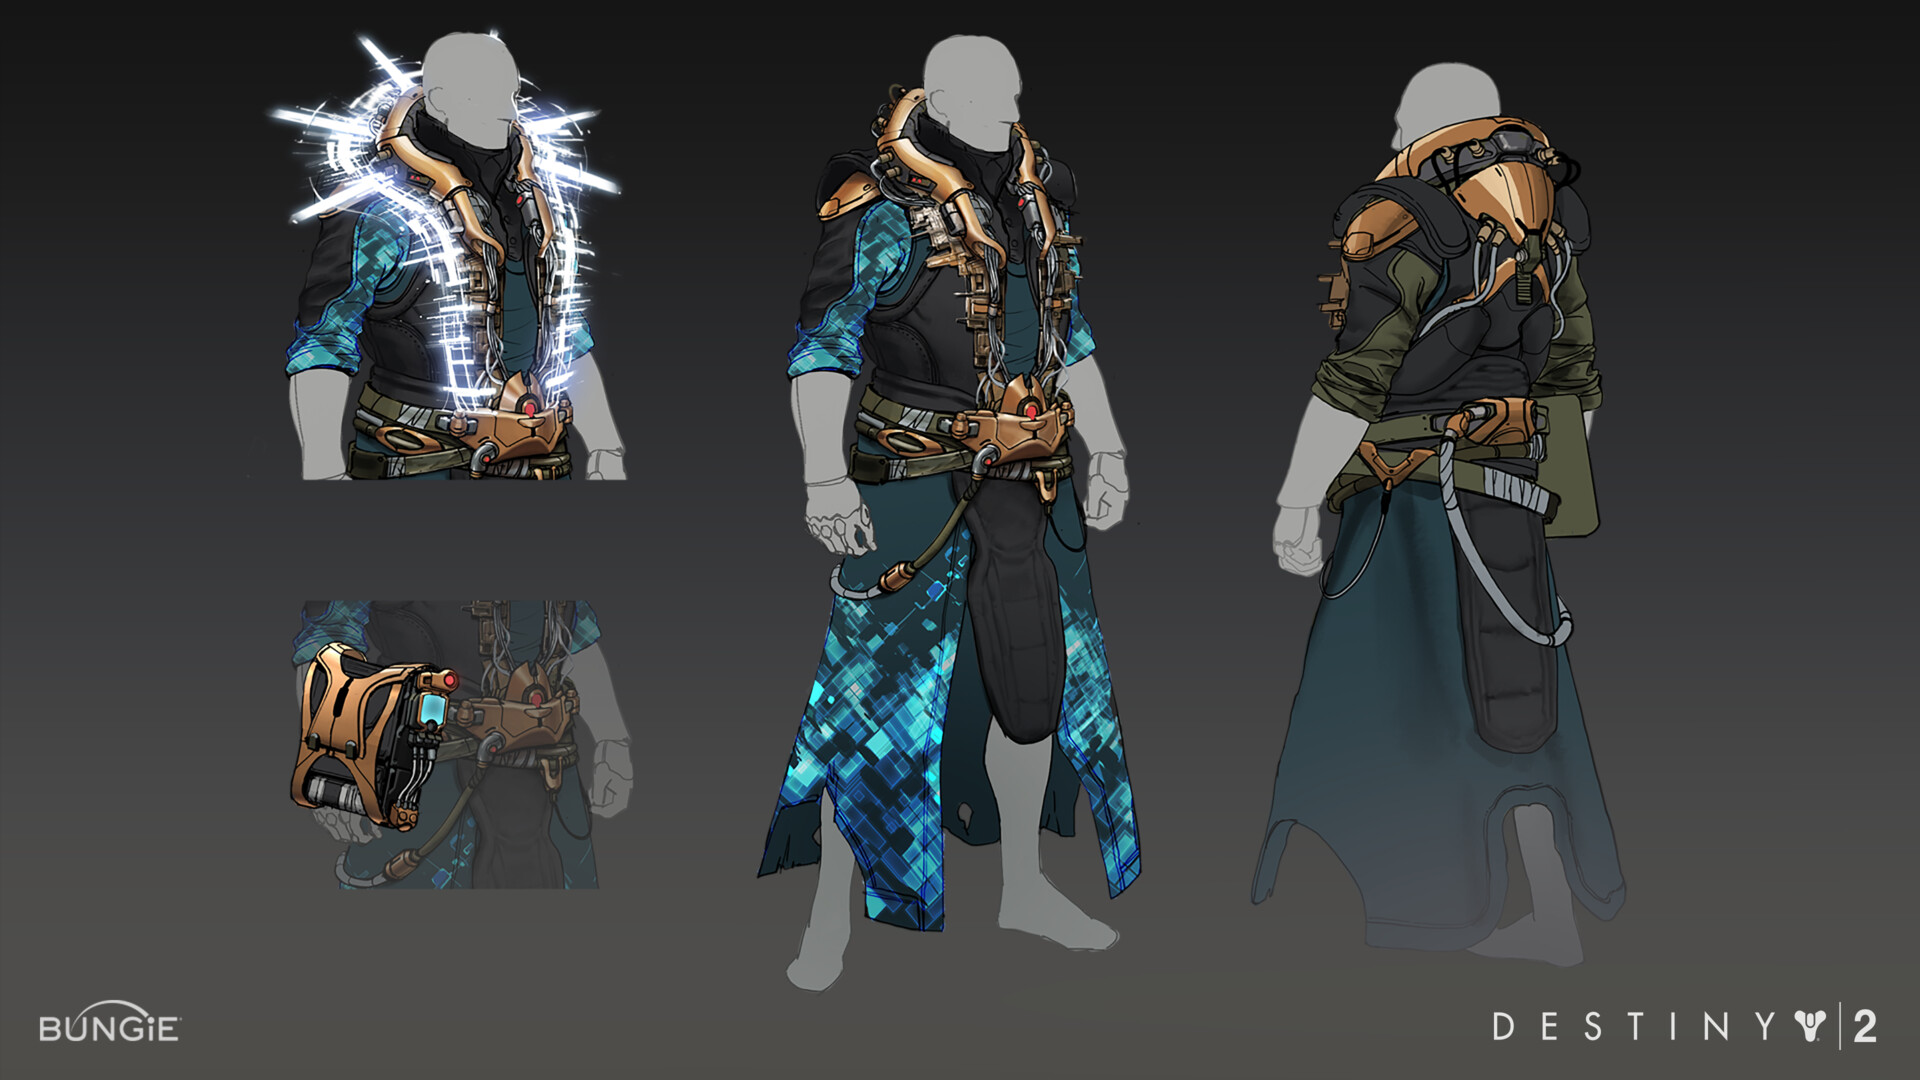 Here's a part of the collection of concepts I contributed to Destiny 2...